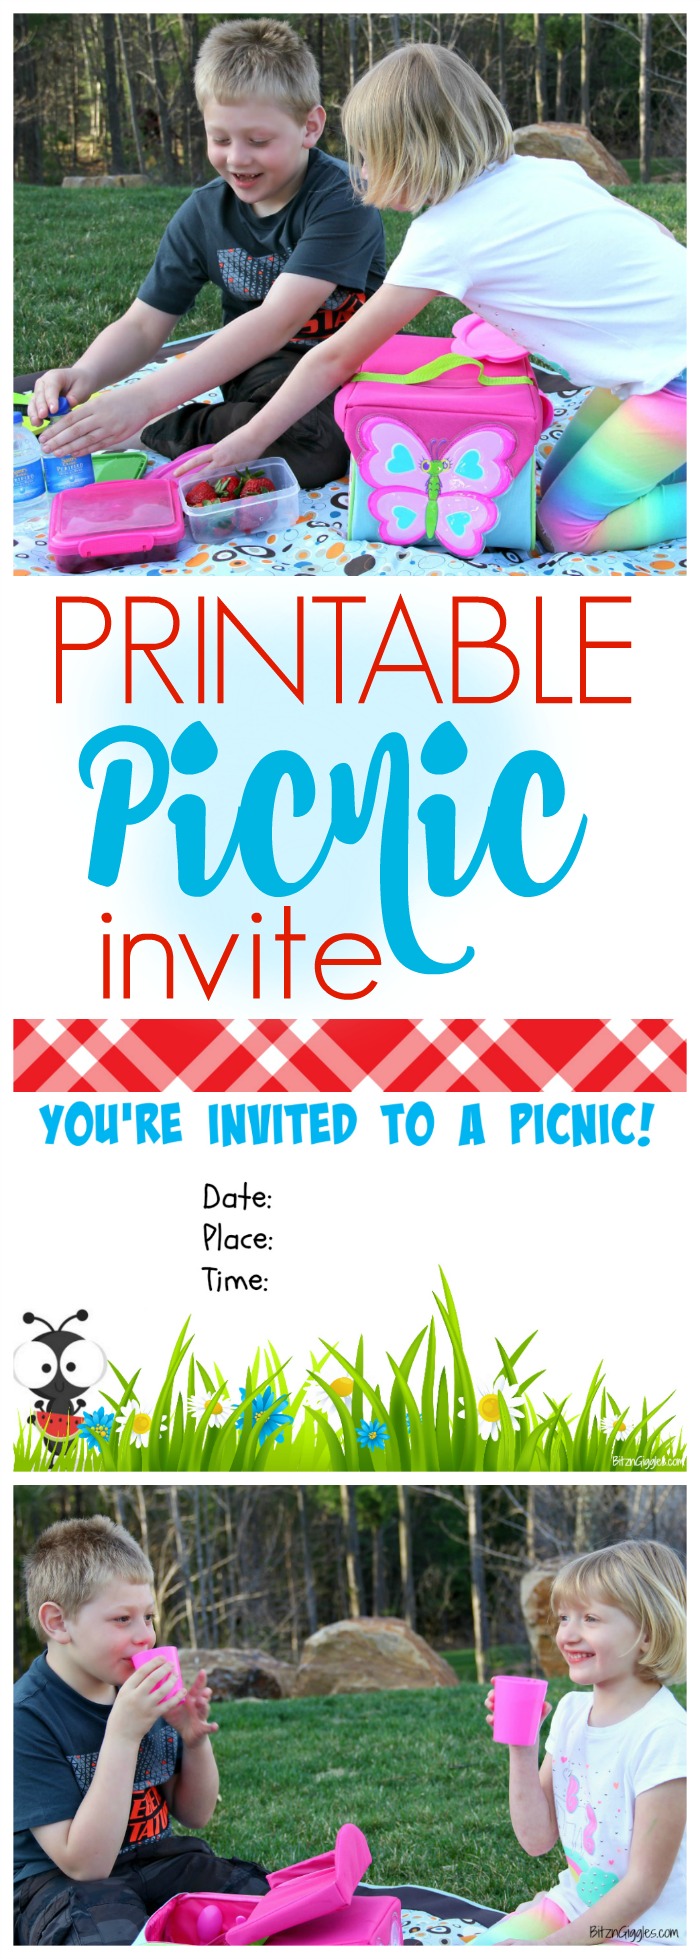 Free Printable Picnic Invite - Surprise your kids with a picnic at a favorite park or right in your backyard. A perfect idea for families looking for more quality time together!